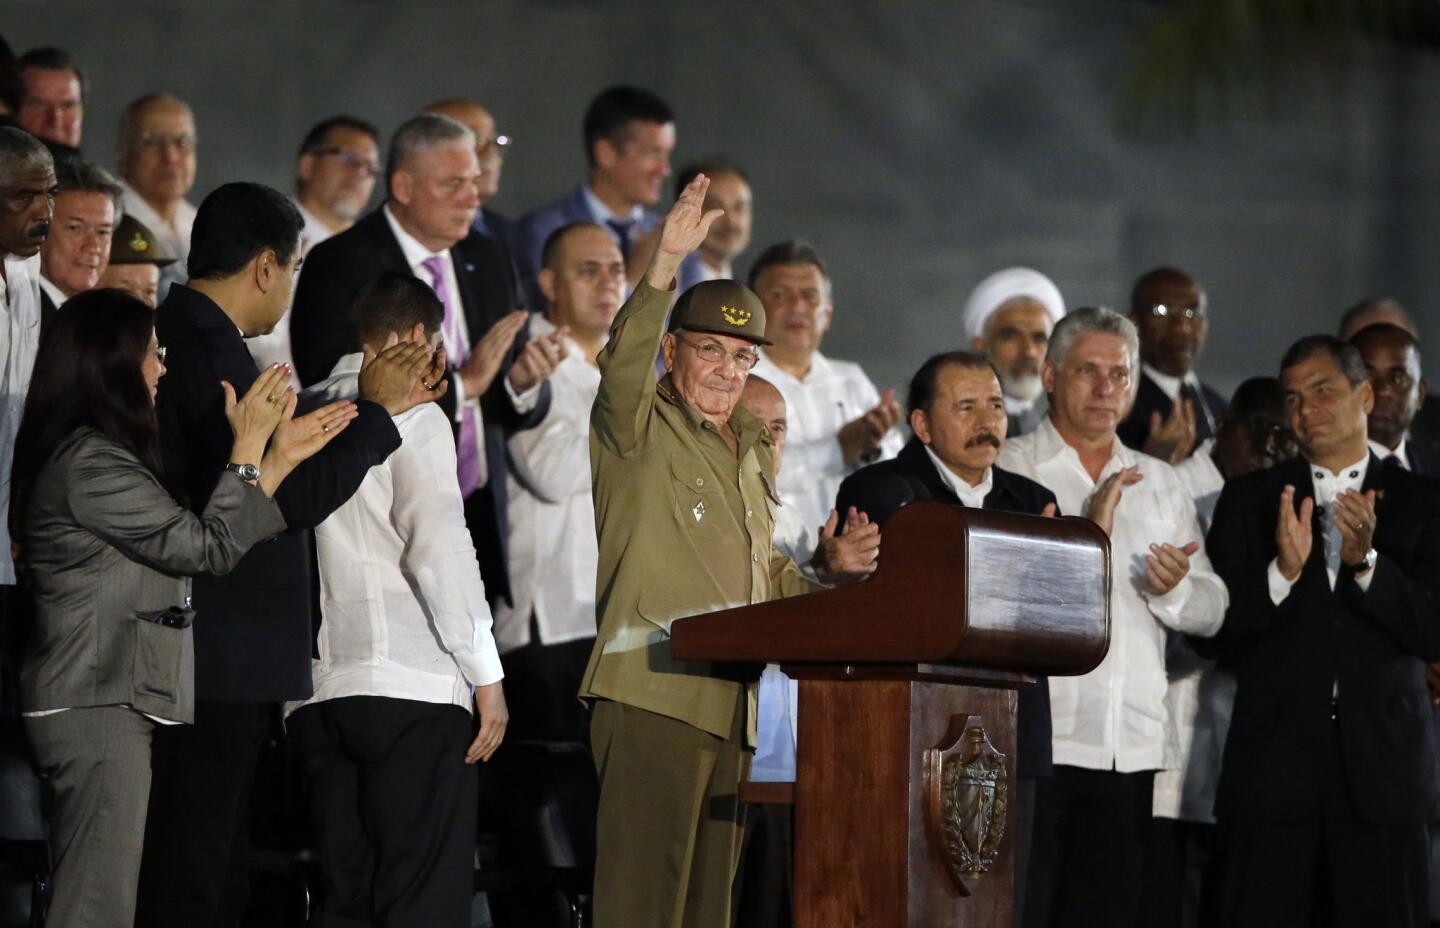 Cuba's President Raul Castro, center, salutes as he arrives at a rally honoring his brother Fidel Castro, who died Friday, at the Revolution Plaza in Havana Tuesday night.